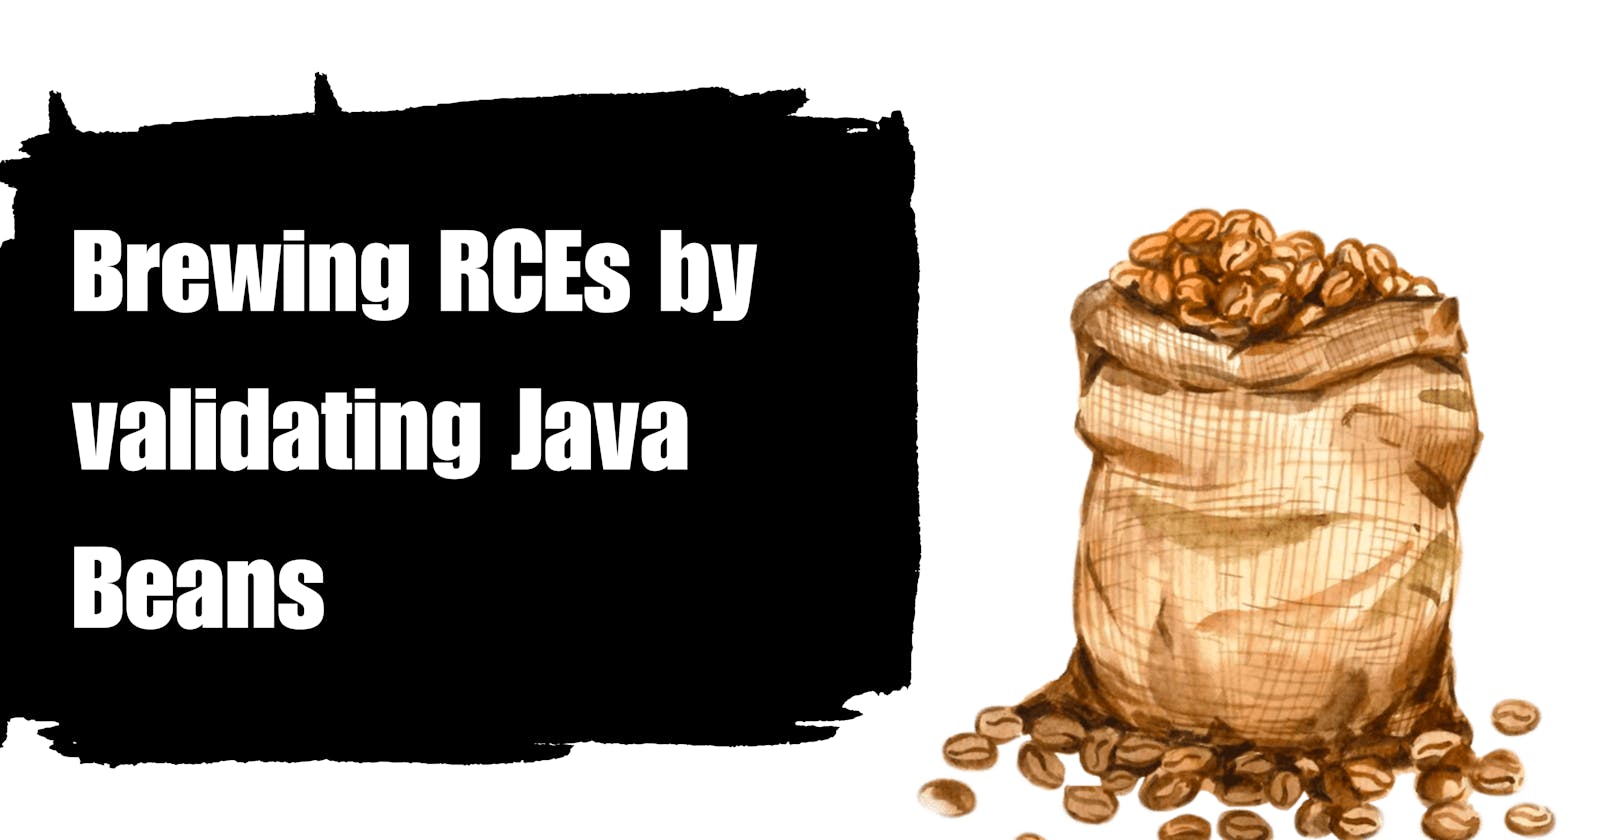 Brewing RCEs by validating Java Beans